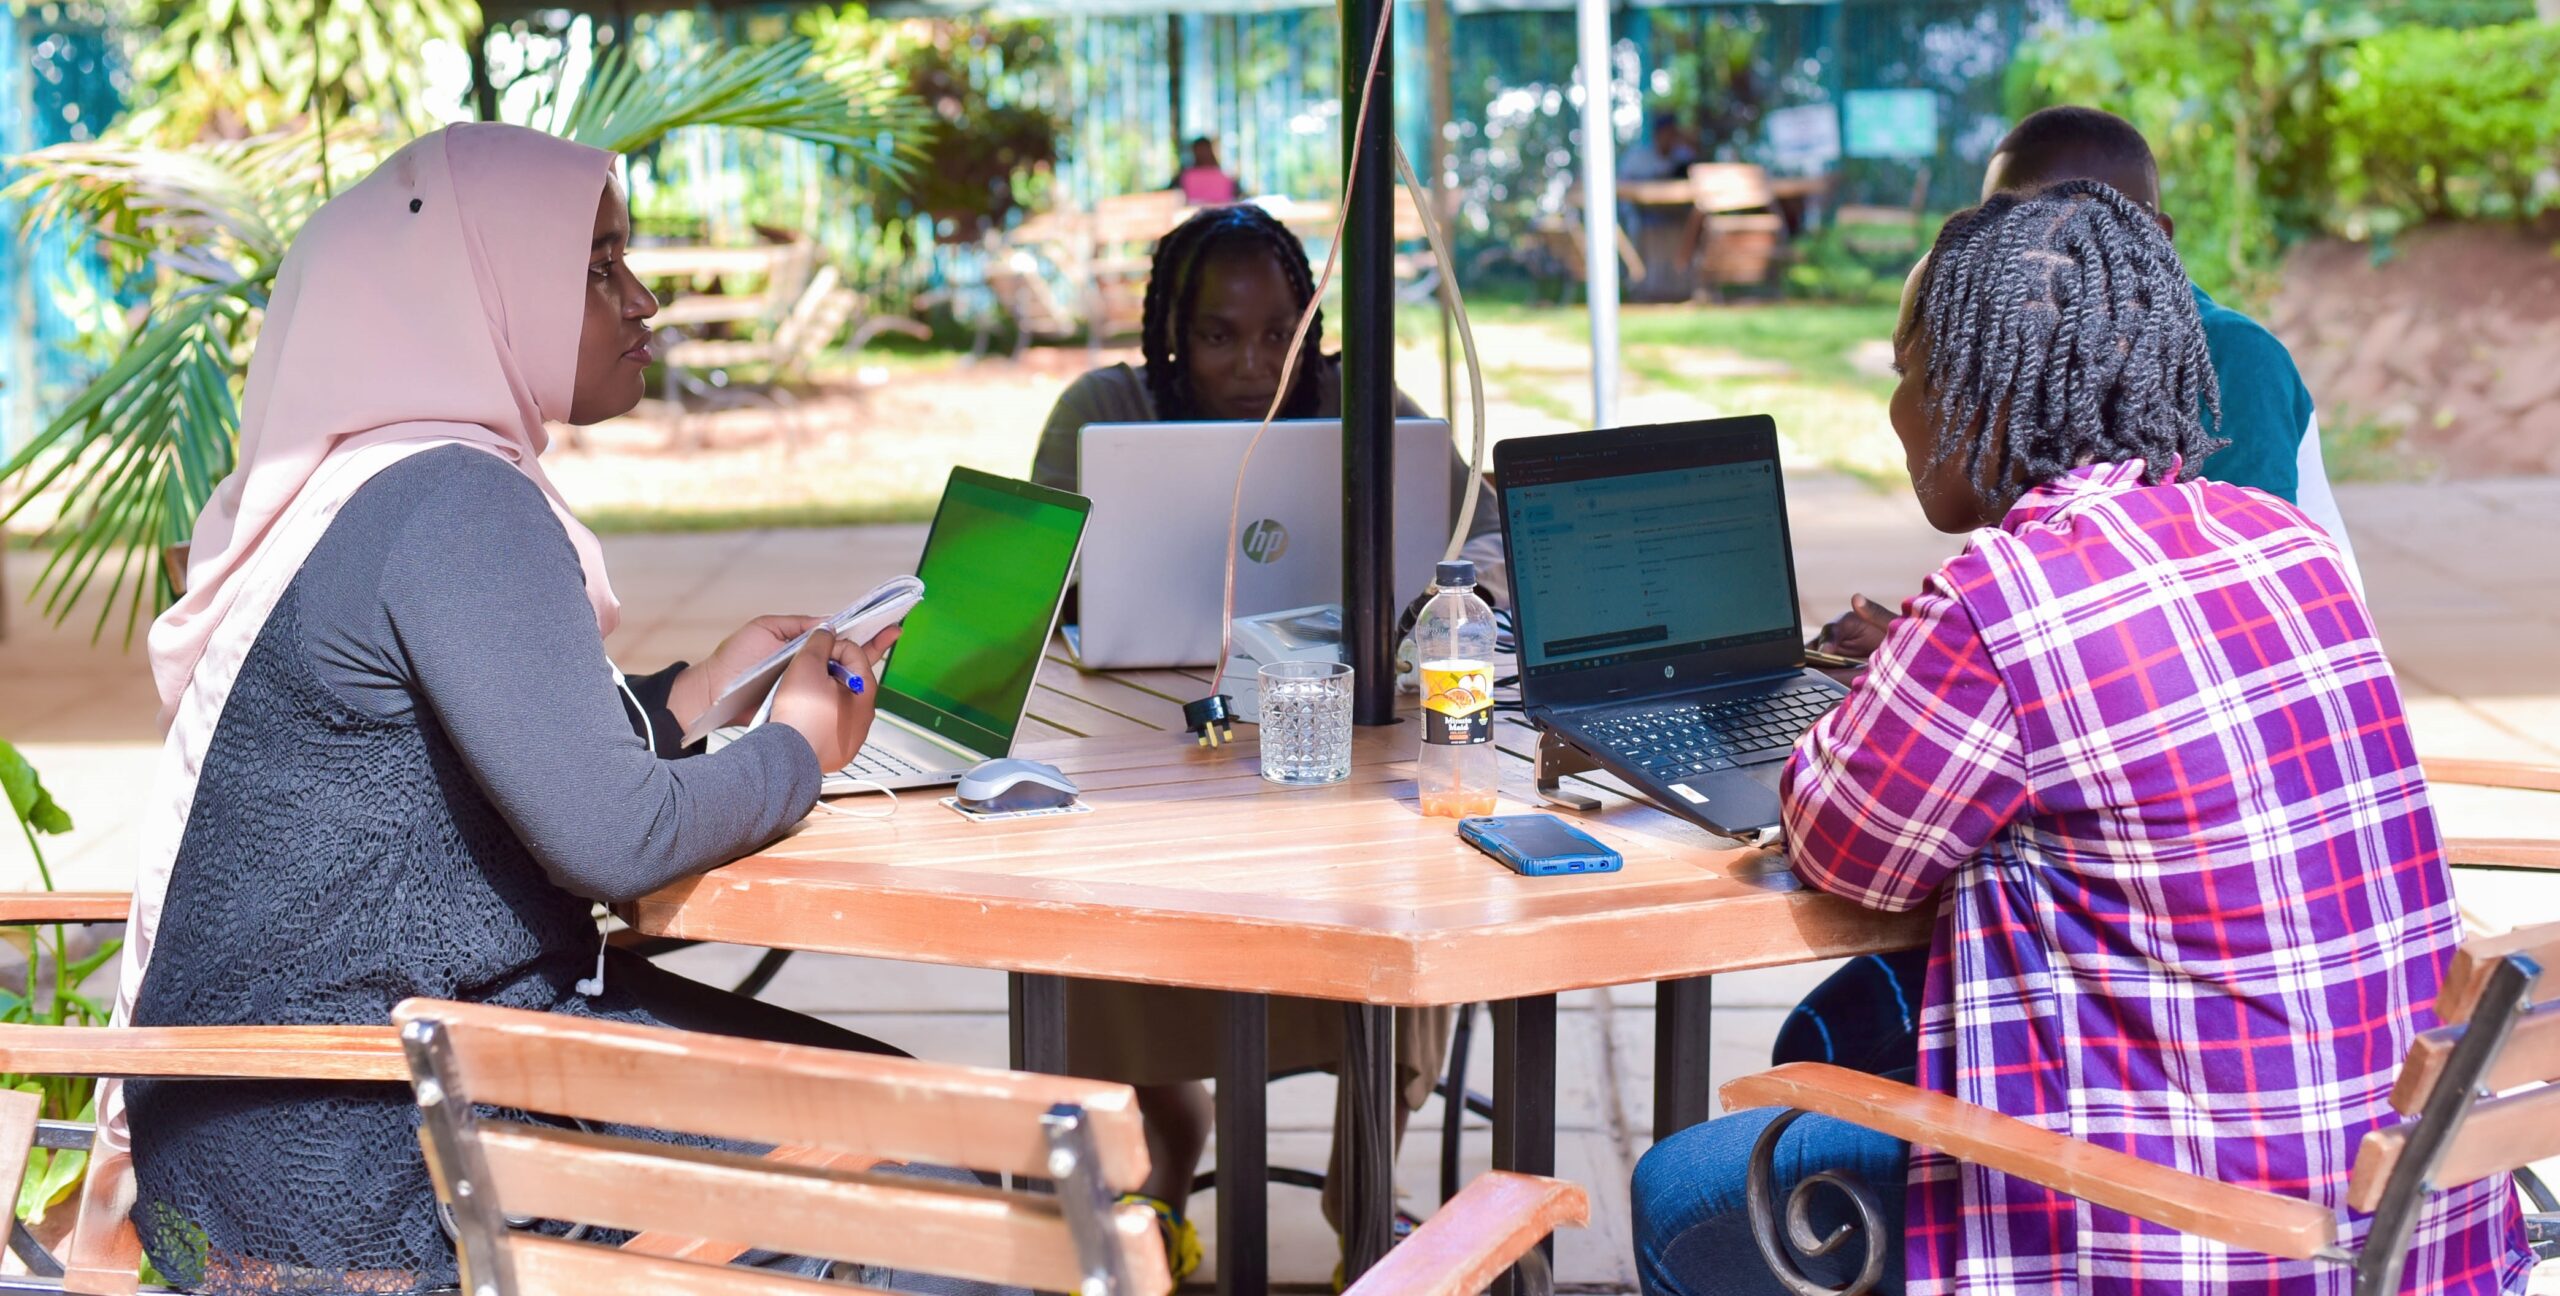 Group of people sitting at outdoor table working on computers